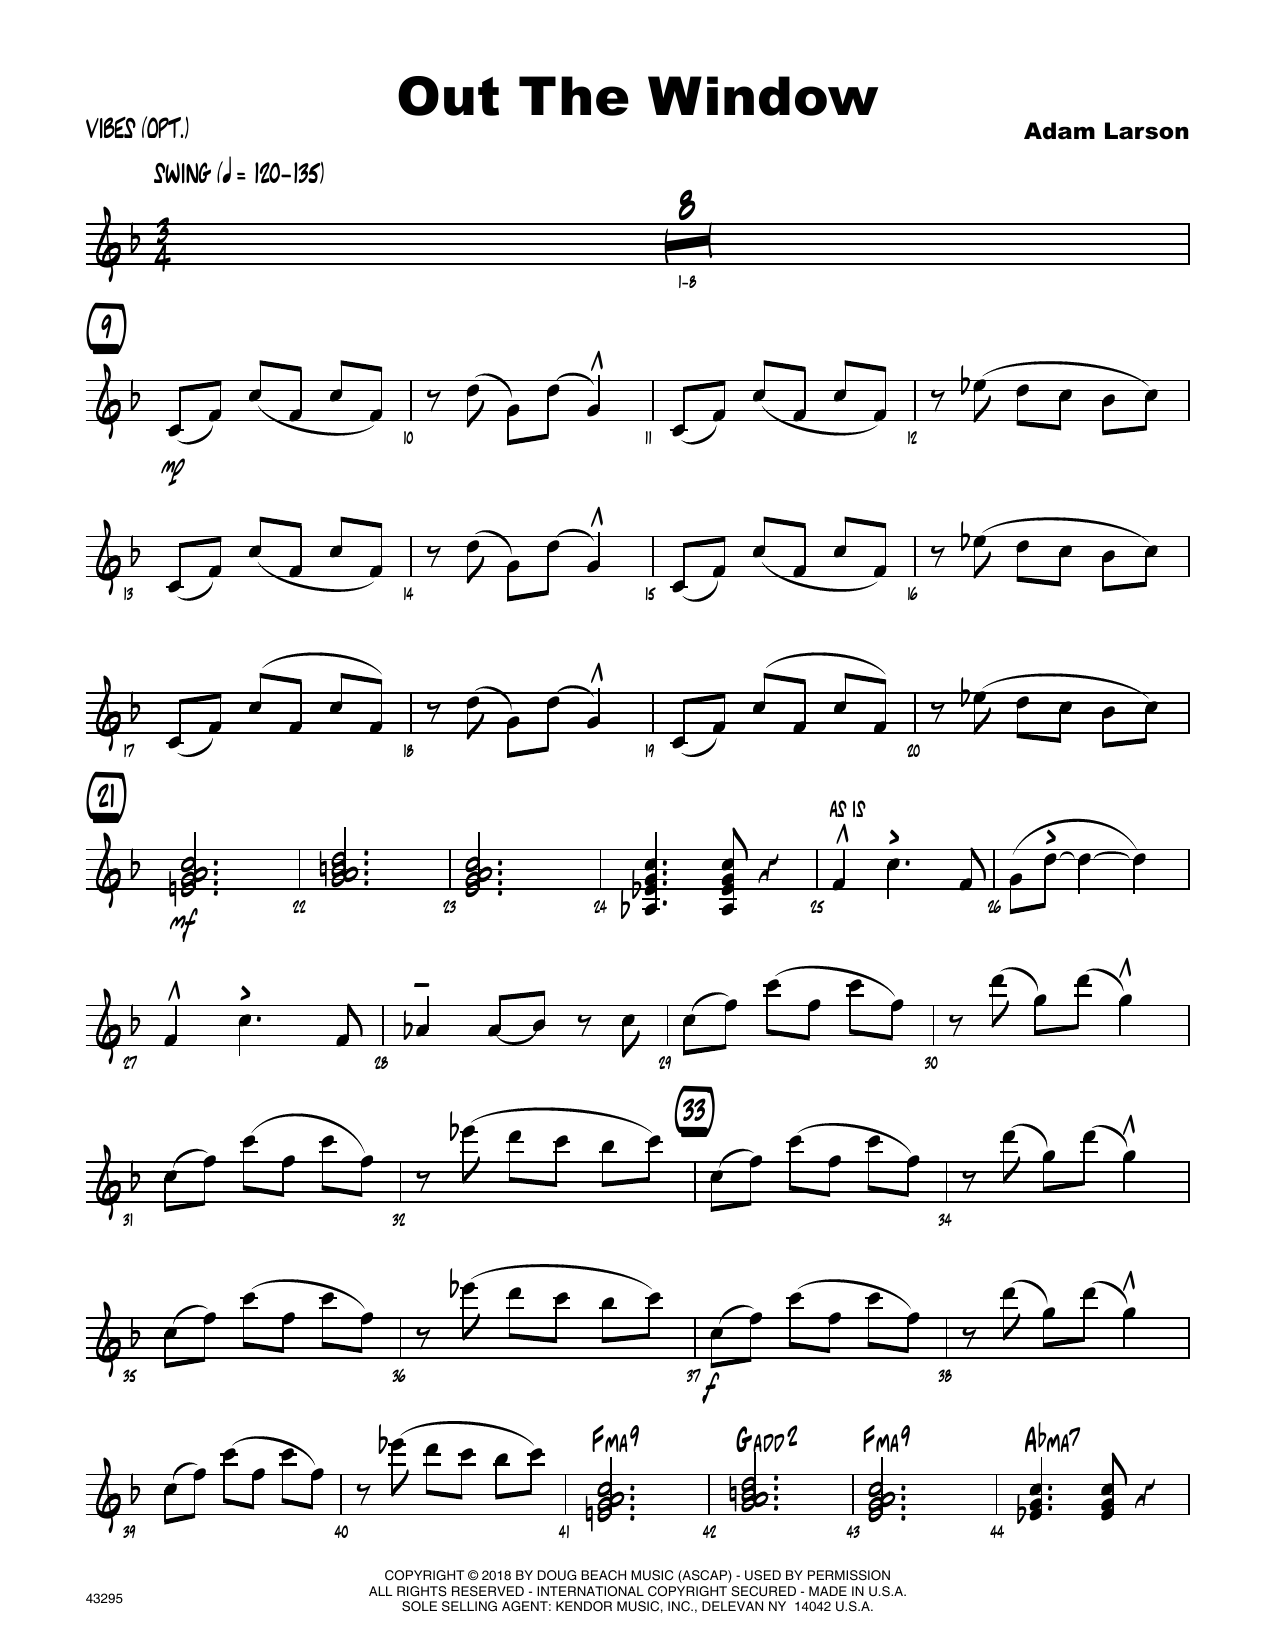 Download Adam Larson Out The Window - Vibes Sheet Music